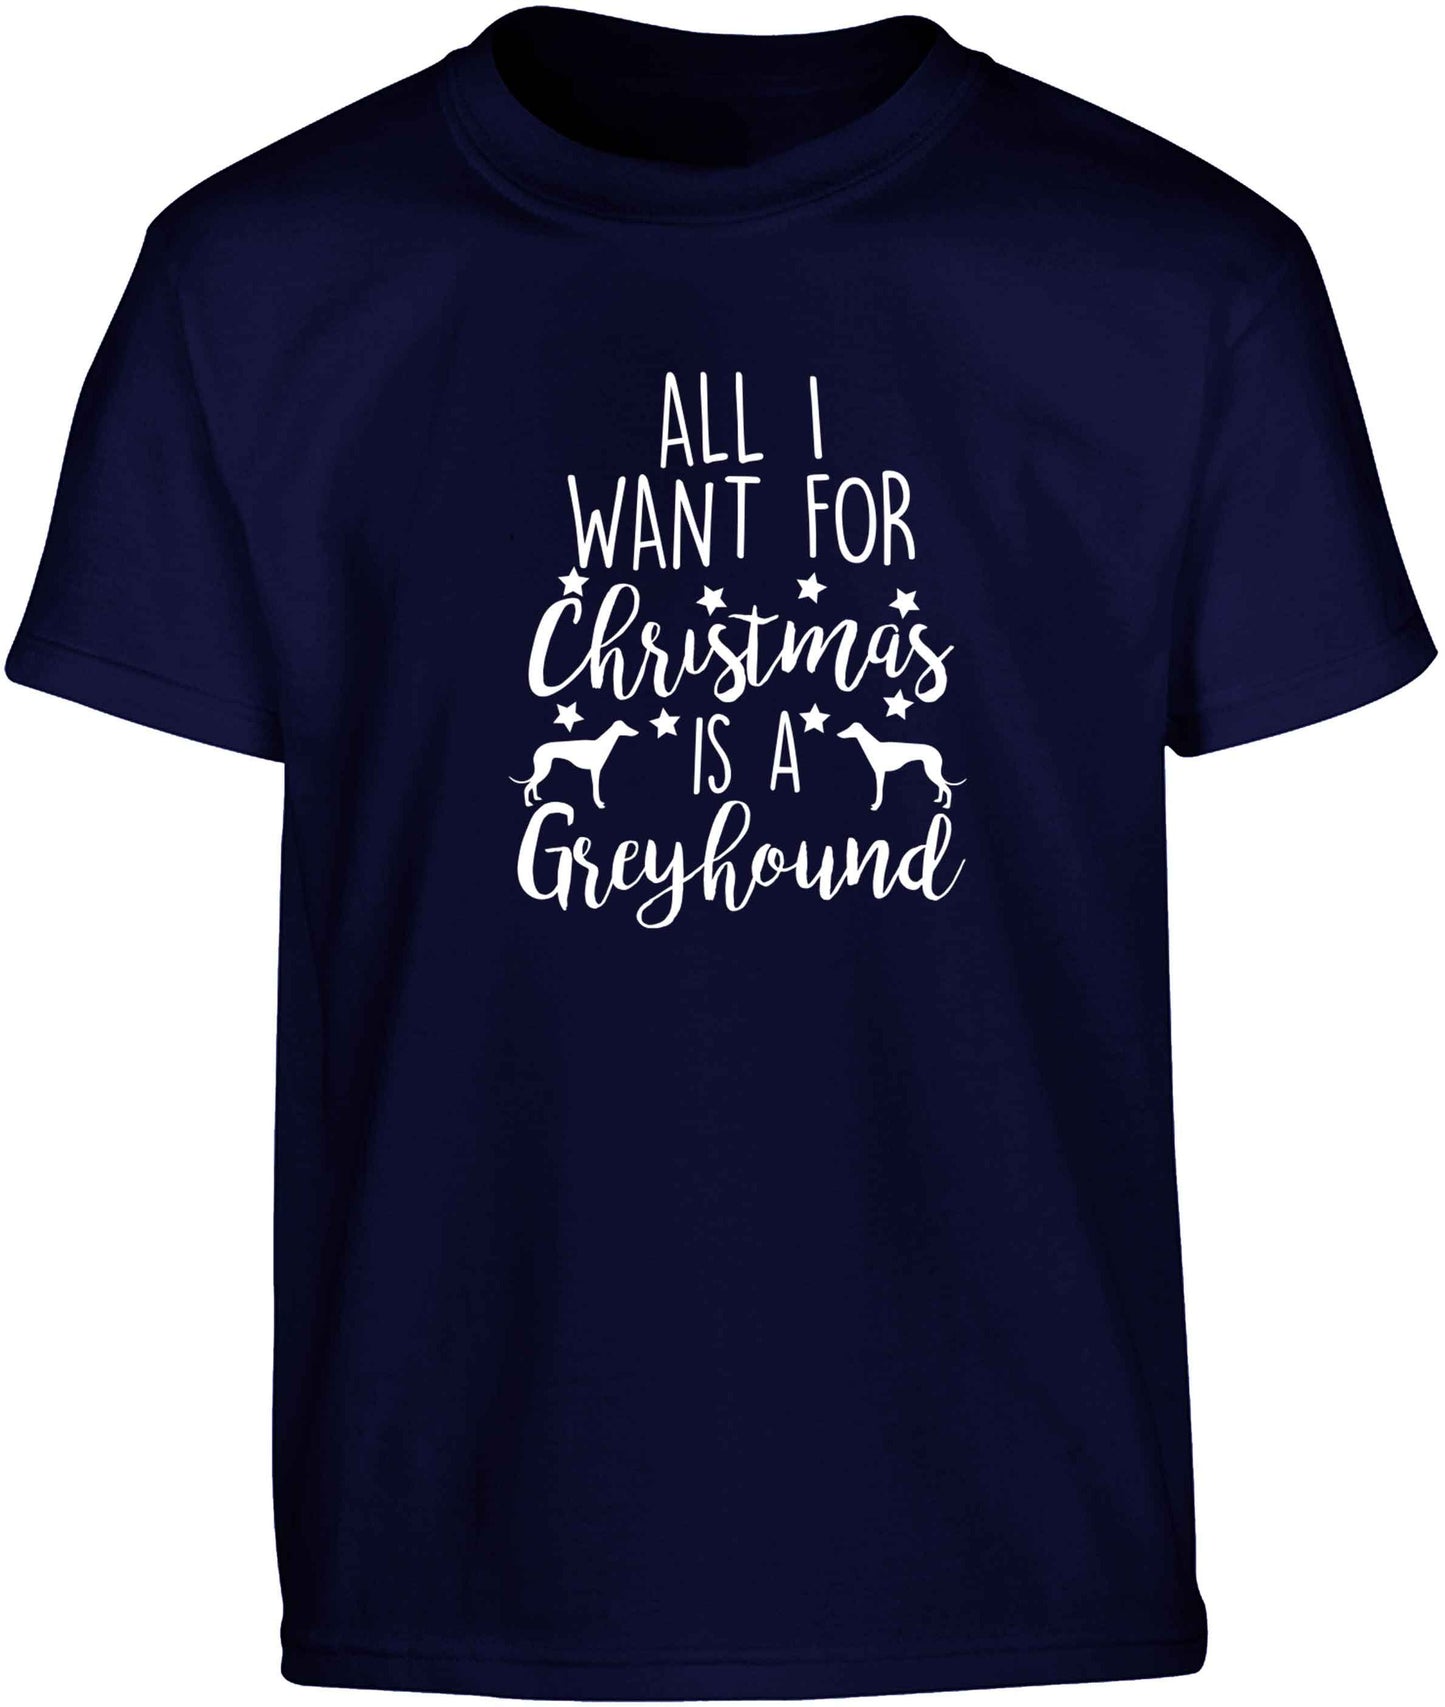 All I want for Christmas is a greyhound Children's navy Tshirt 12-13 Years